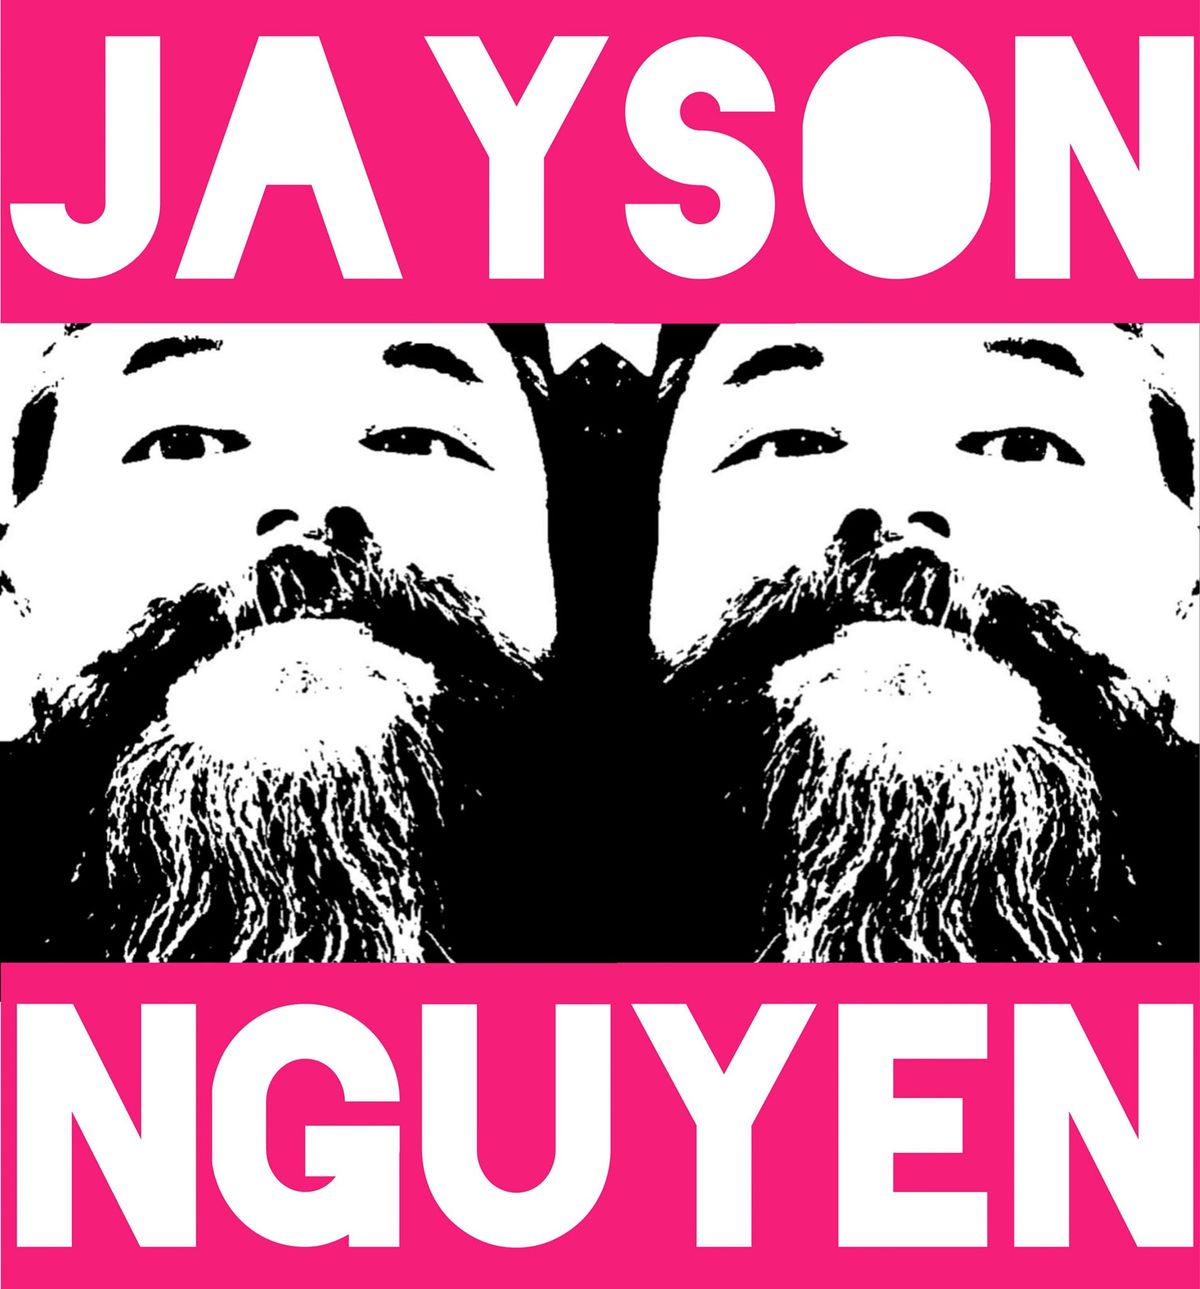 The New Imperialism's Last Show: A Benefit For Jayson's Family